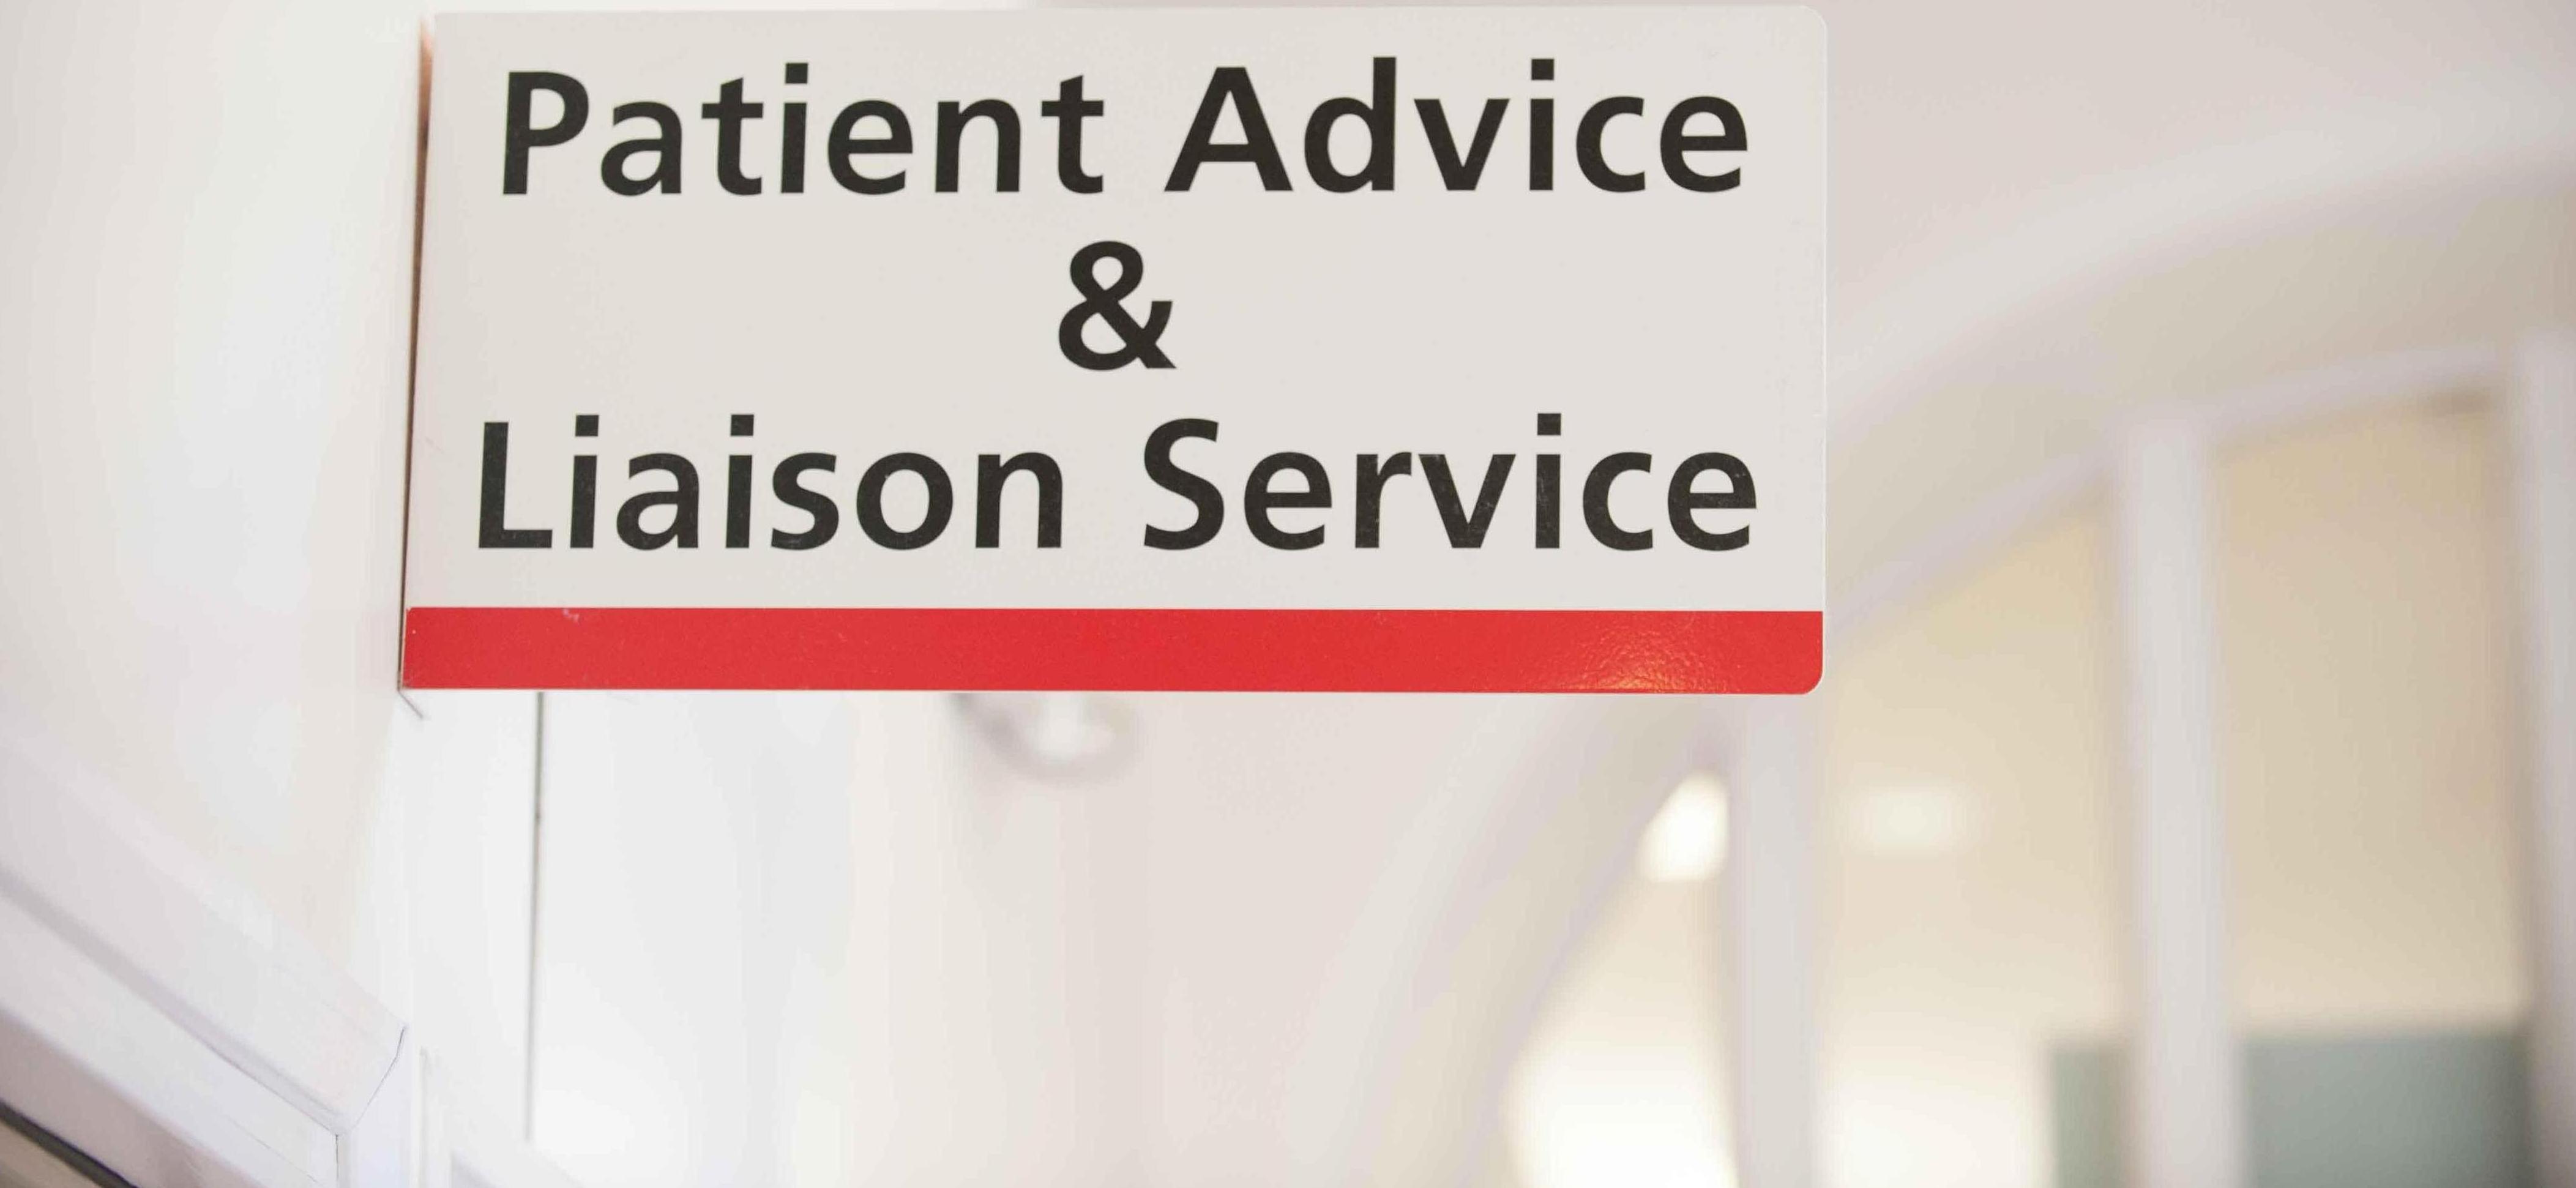 A written sign displaying the patient advice and liaison service